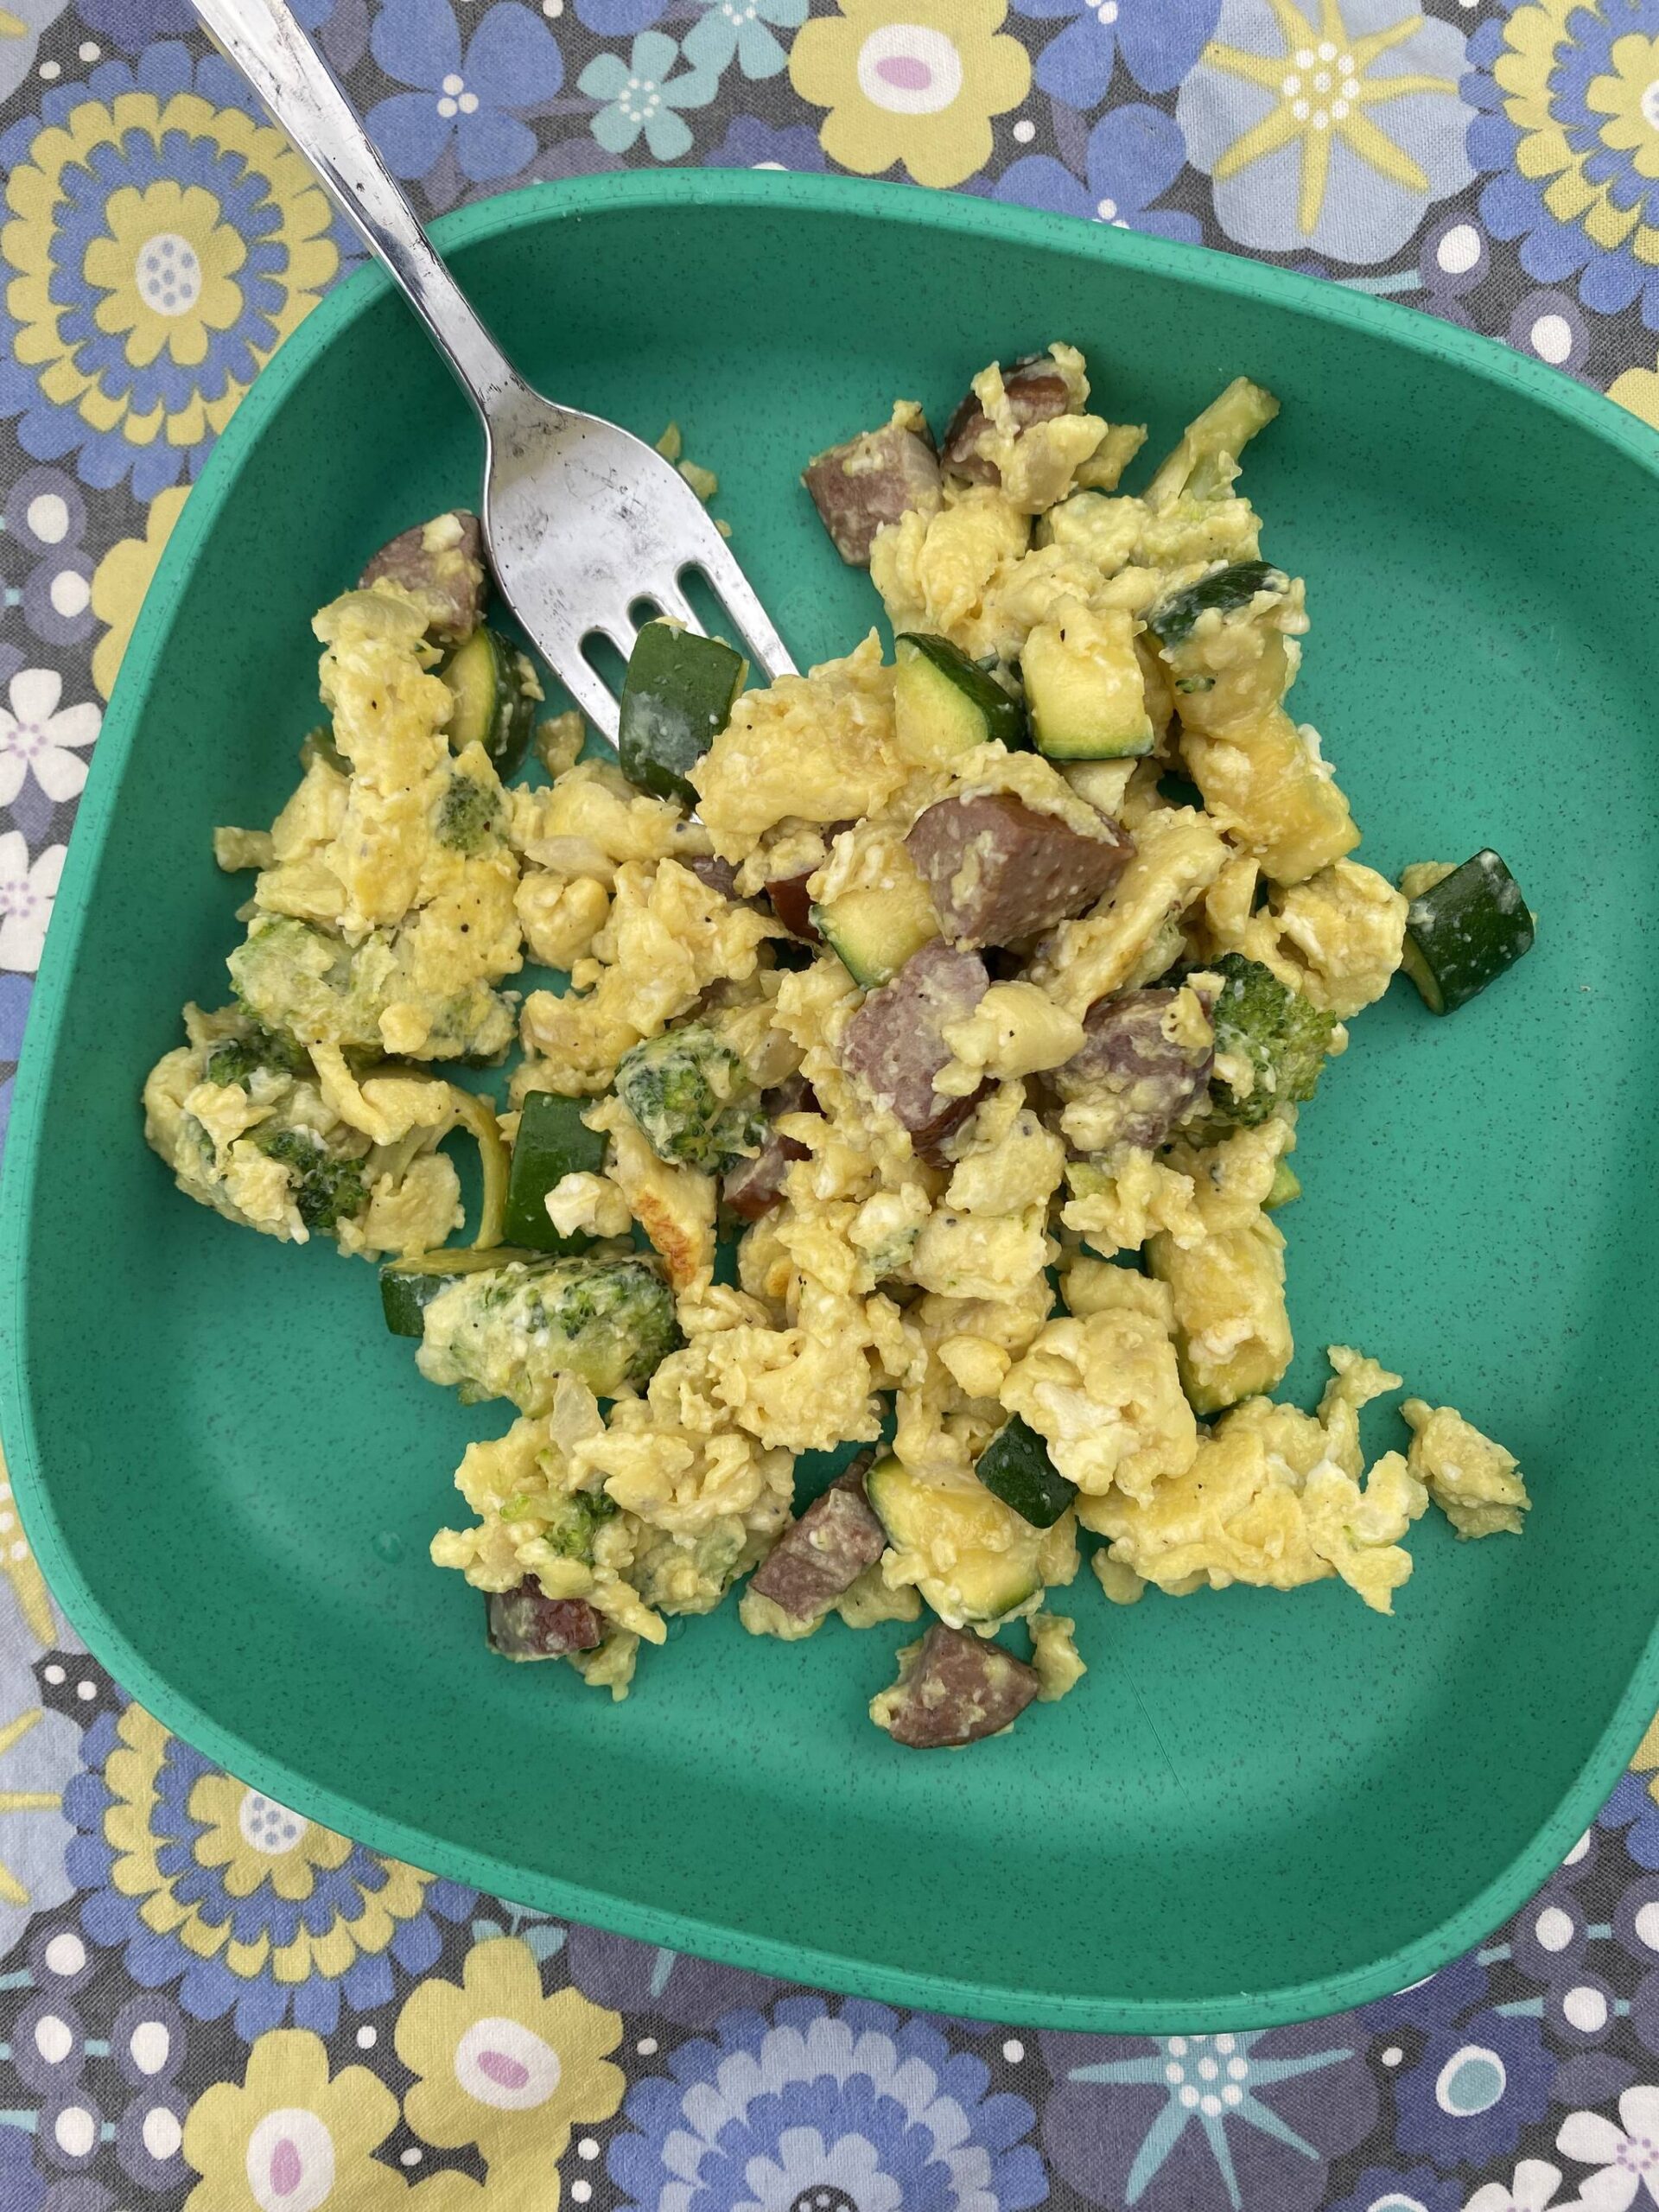 Scrambled eggs with diced zucchini, kielbasa sausage and broccoli florets cooked over a firepit make a hearty and doable outdoors meal. (Photo by Tressa Dale/Peninsula Clarion)